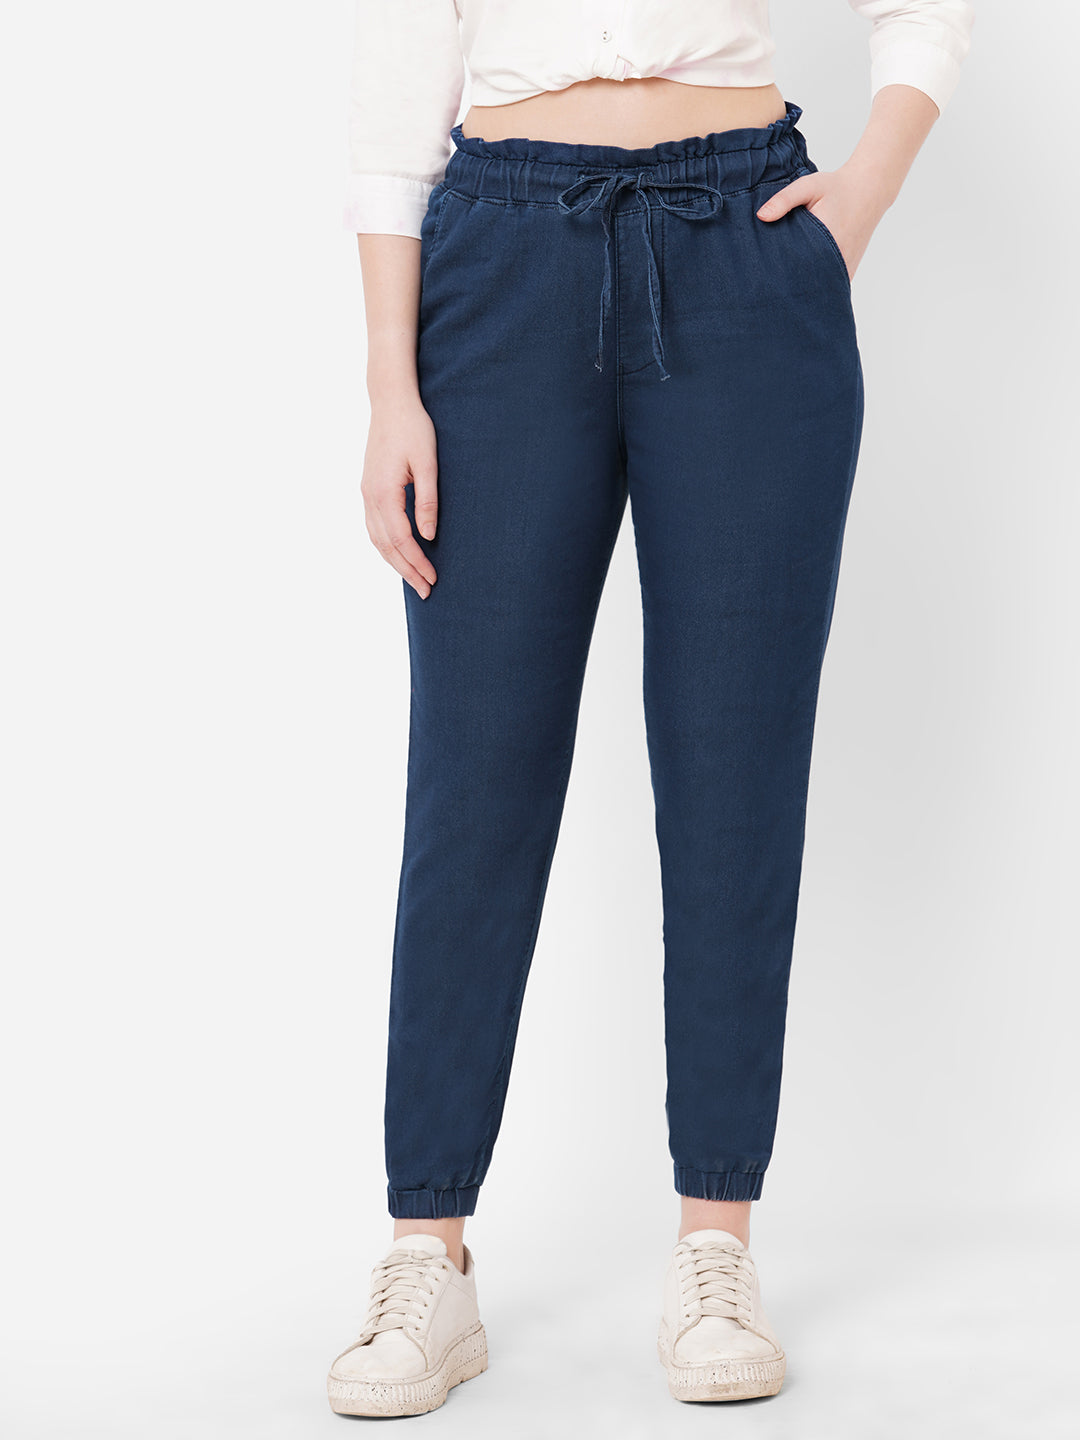 Buy Blue Jeans & Jeggings for Women by Buda Jeans Co Online | Ajio.com